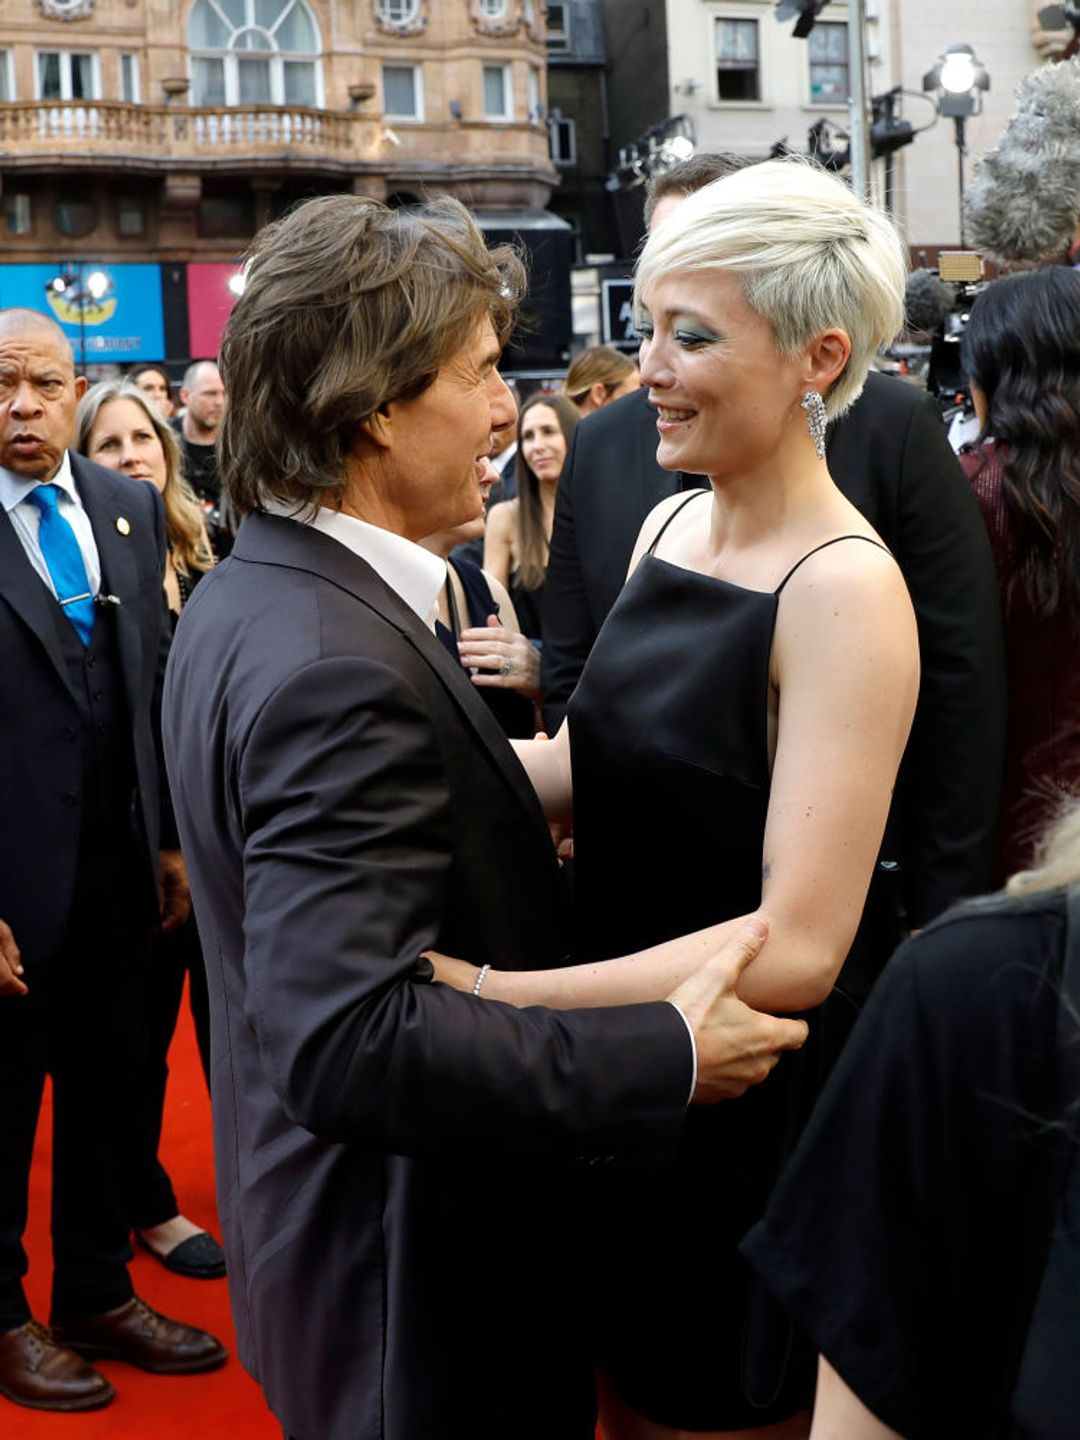 Pom Klementieff and Tom Cruise drop by for a sweet reunion on the red carpet